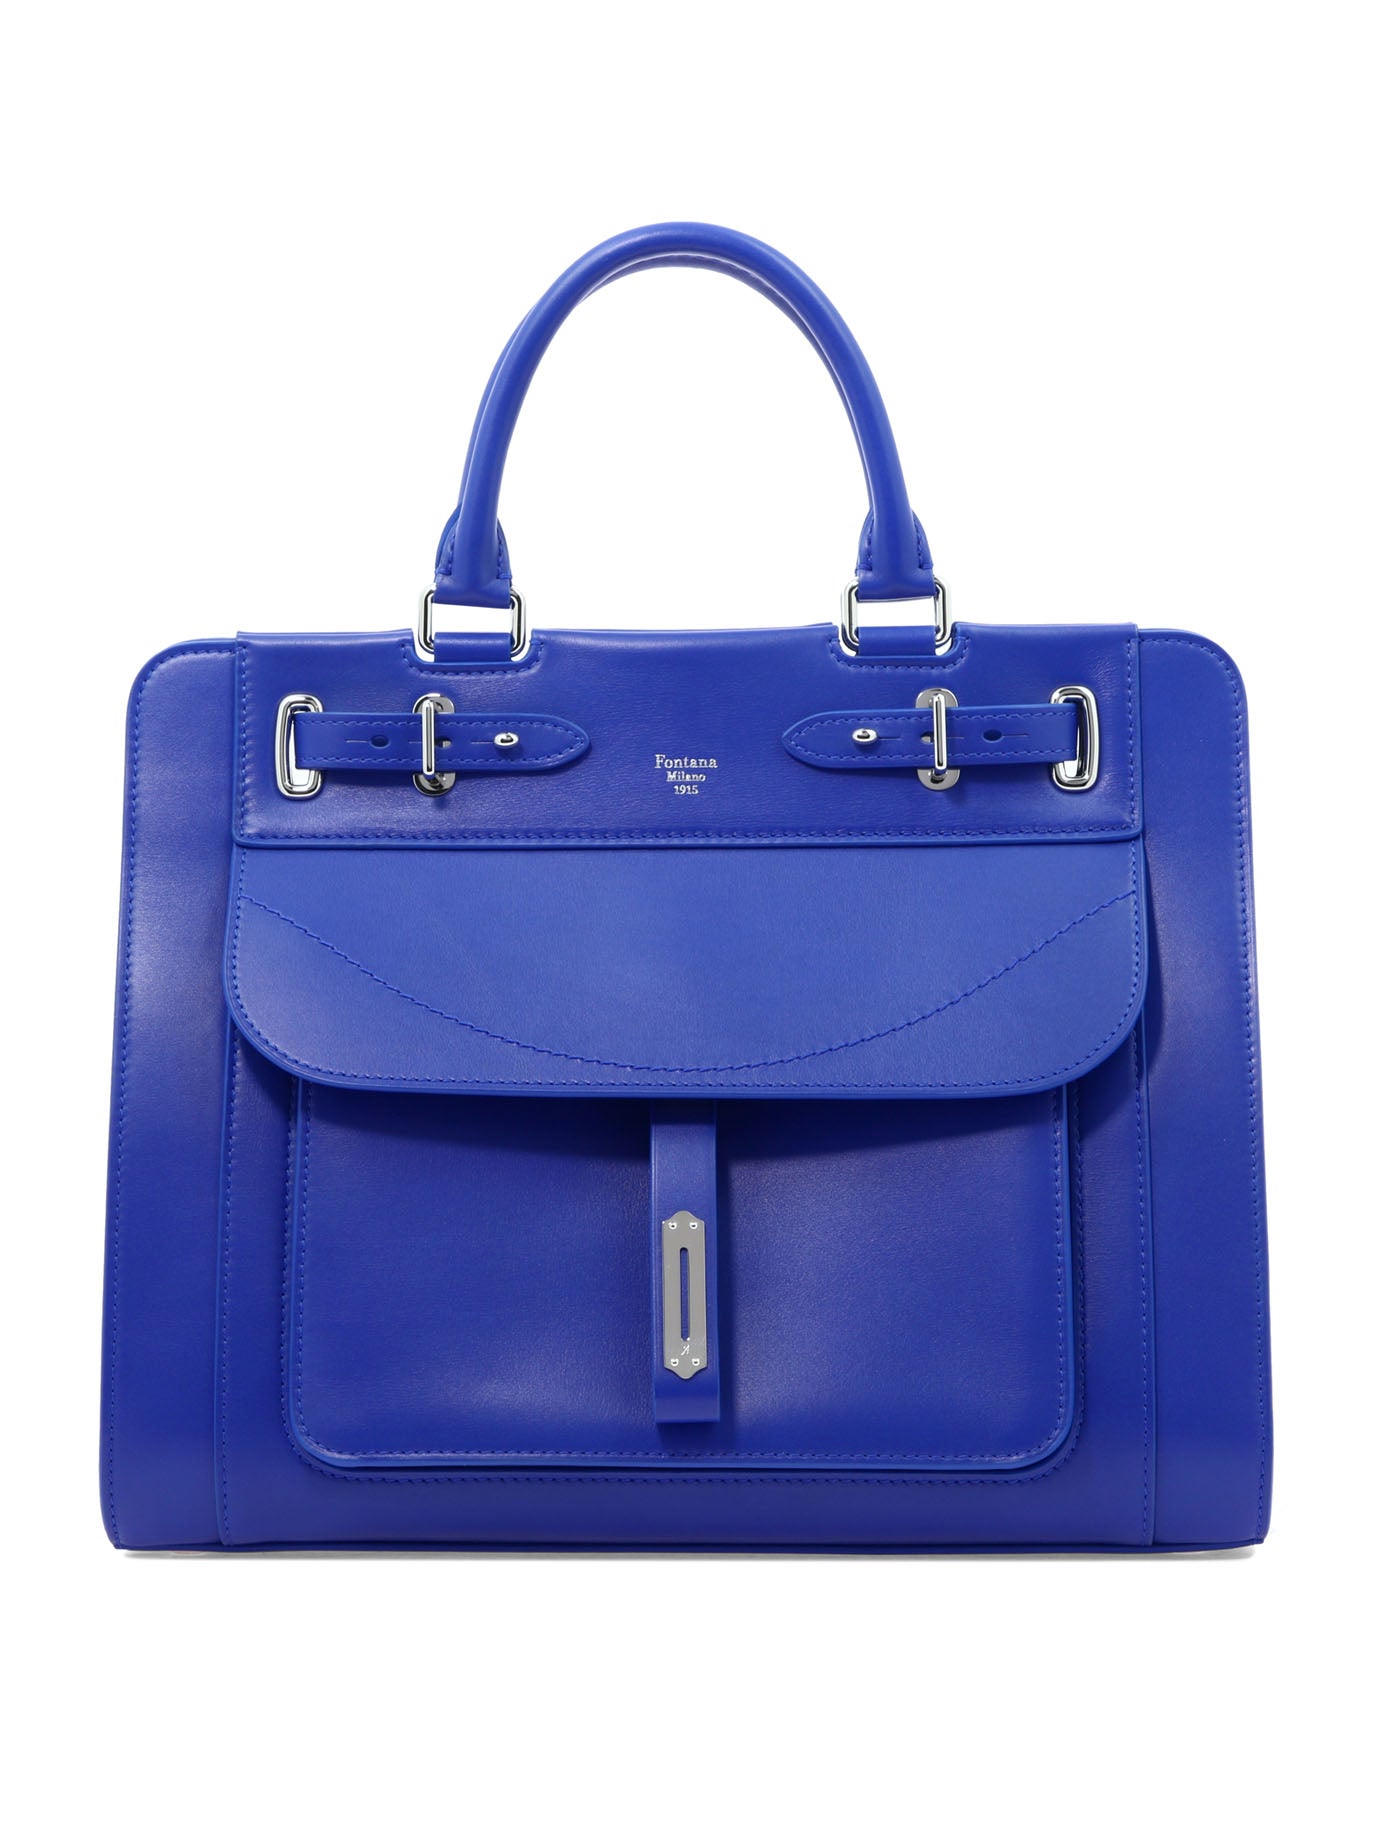 Shop Fontana Milano 1915 Blue Leather Handbag For Women With Top-handle And Zip Closure